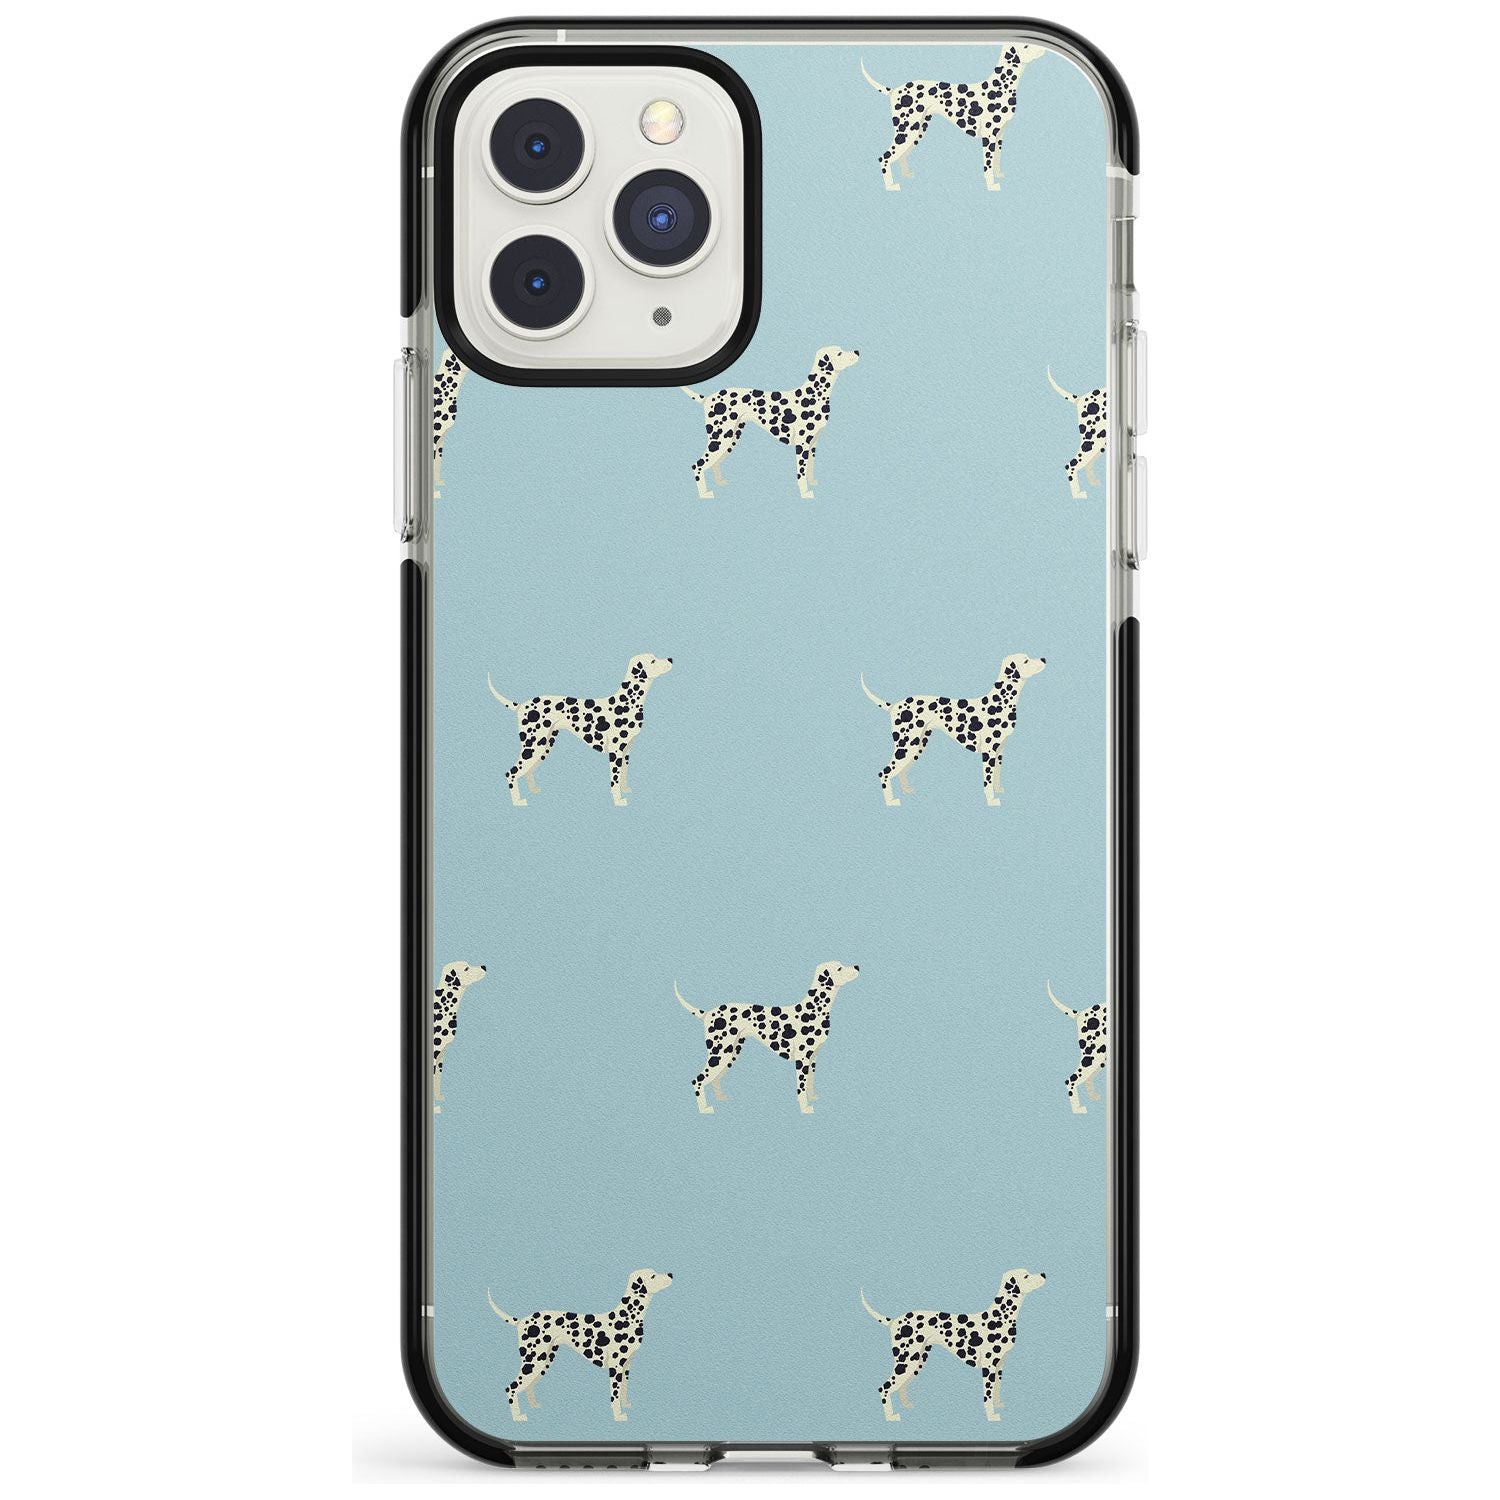 Dalmation Dog Pattern Black Impact Phone Case for iPhone 11 Pro Max